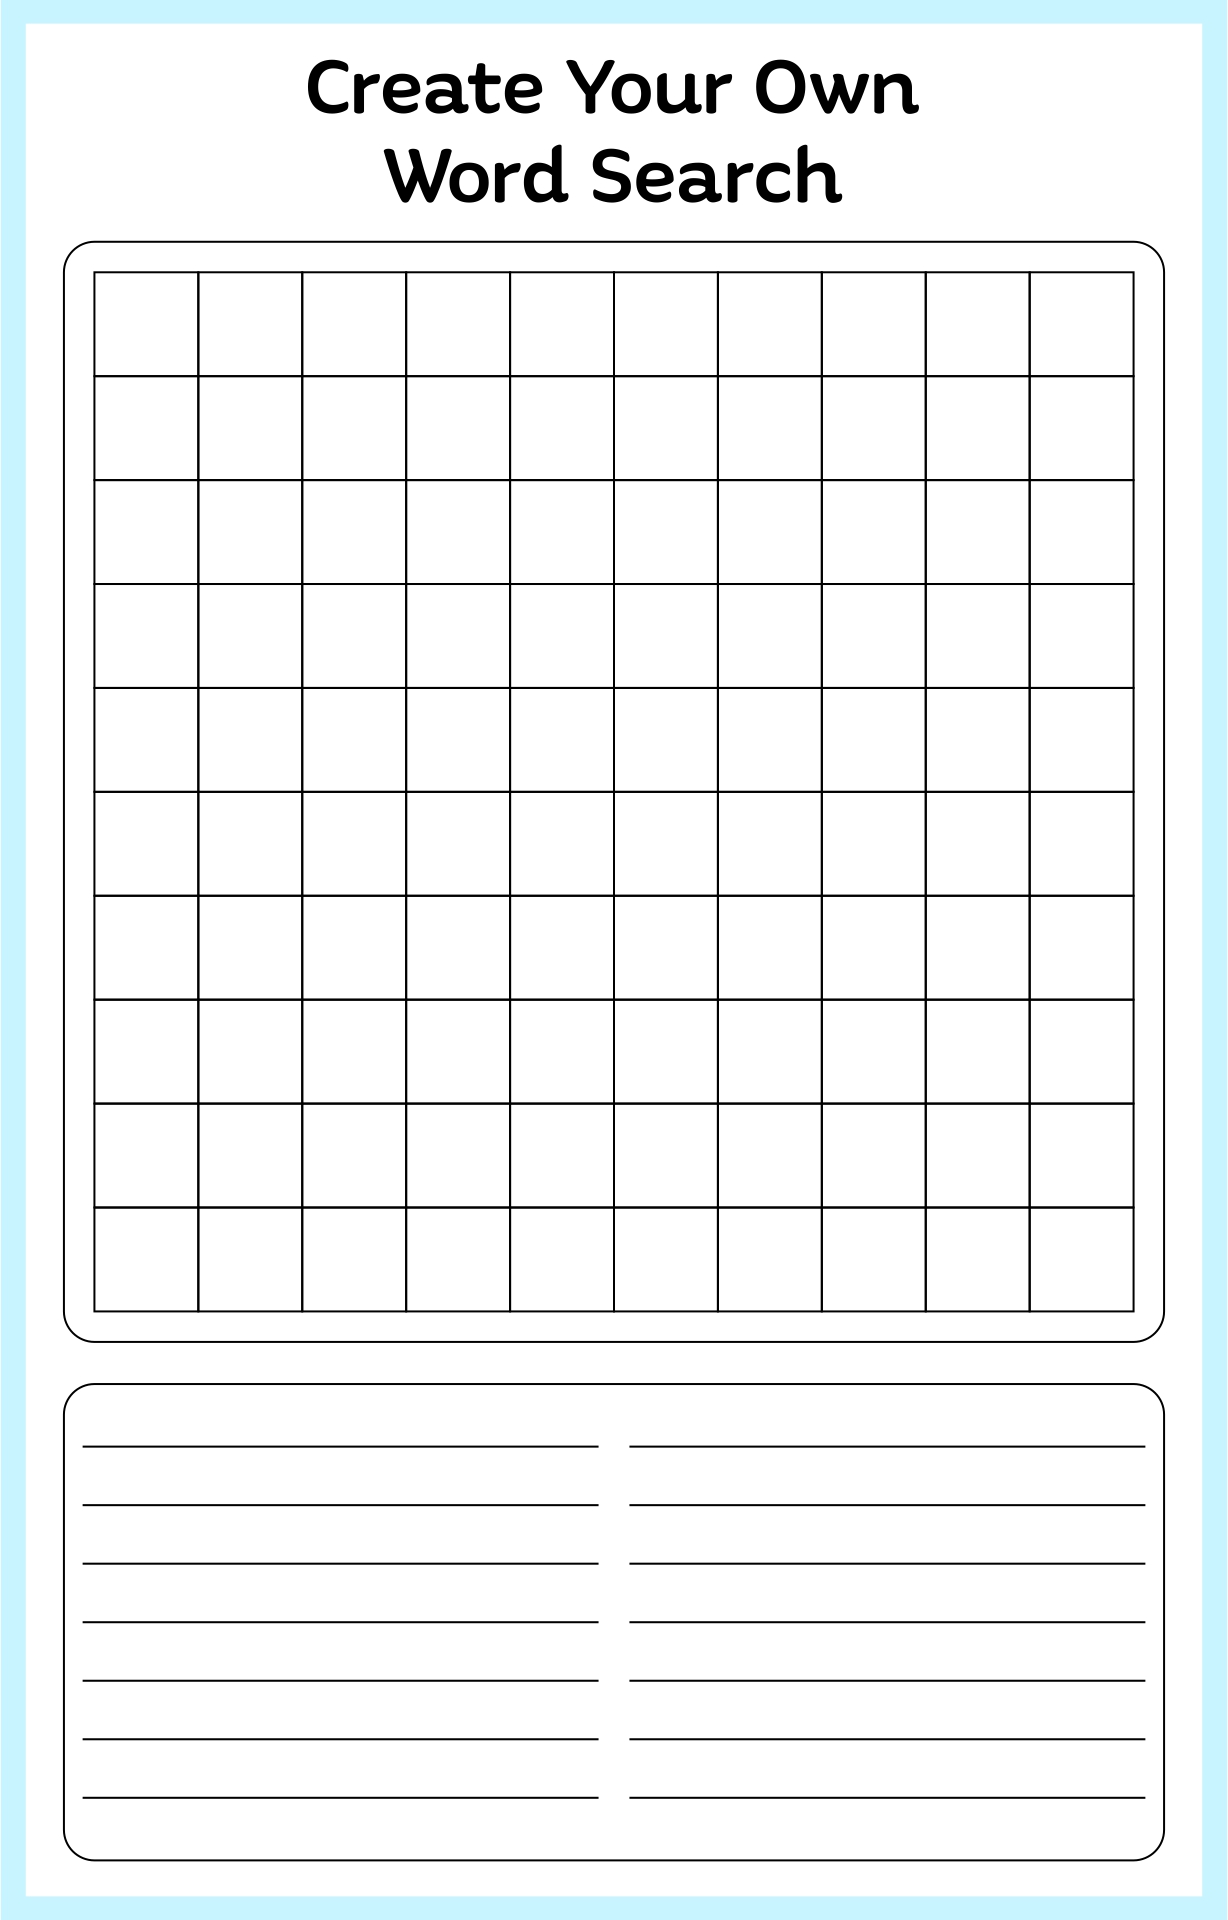 word-search-blank-template